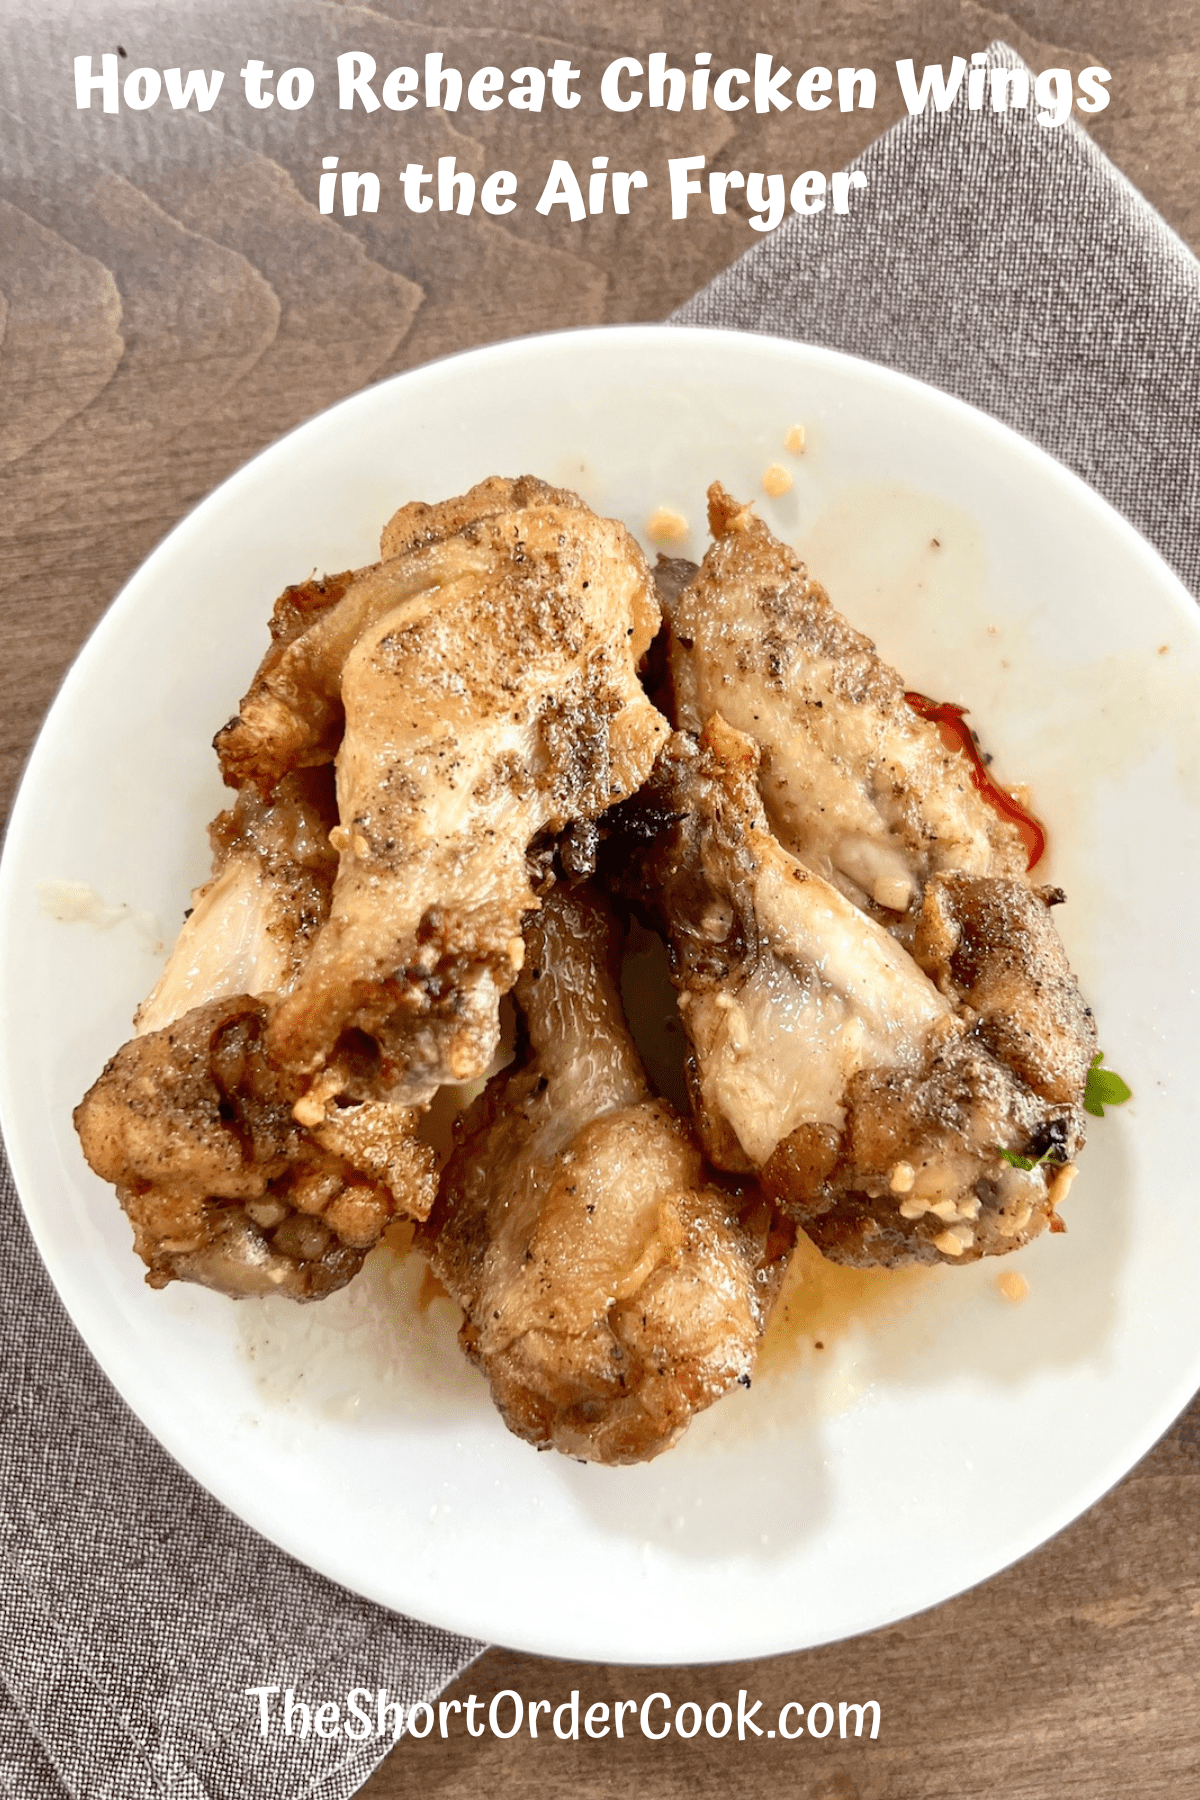 How to Reheat Chicken Wings in the Air Fryer plated with a linen napkin.